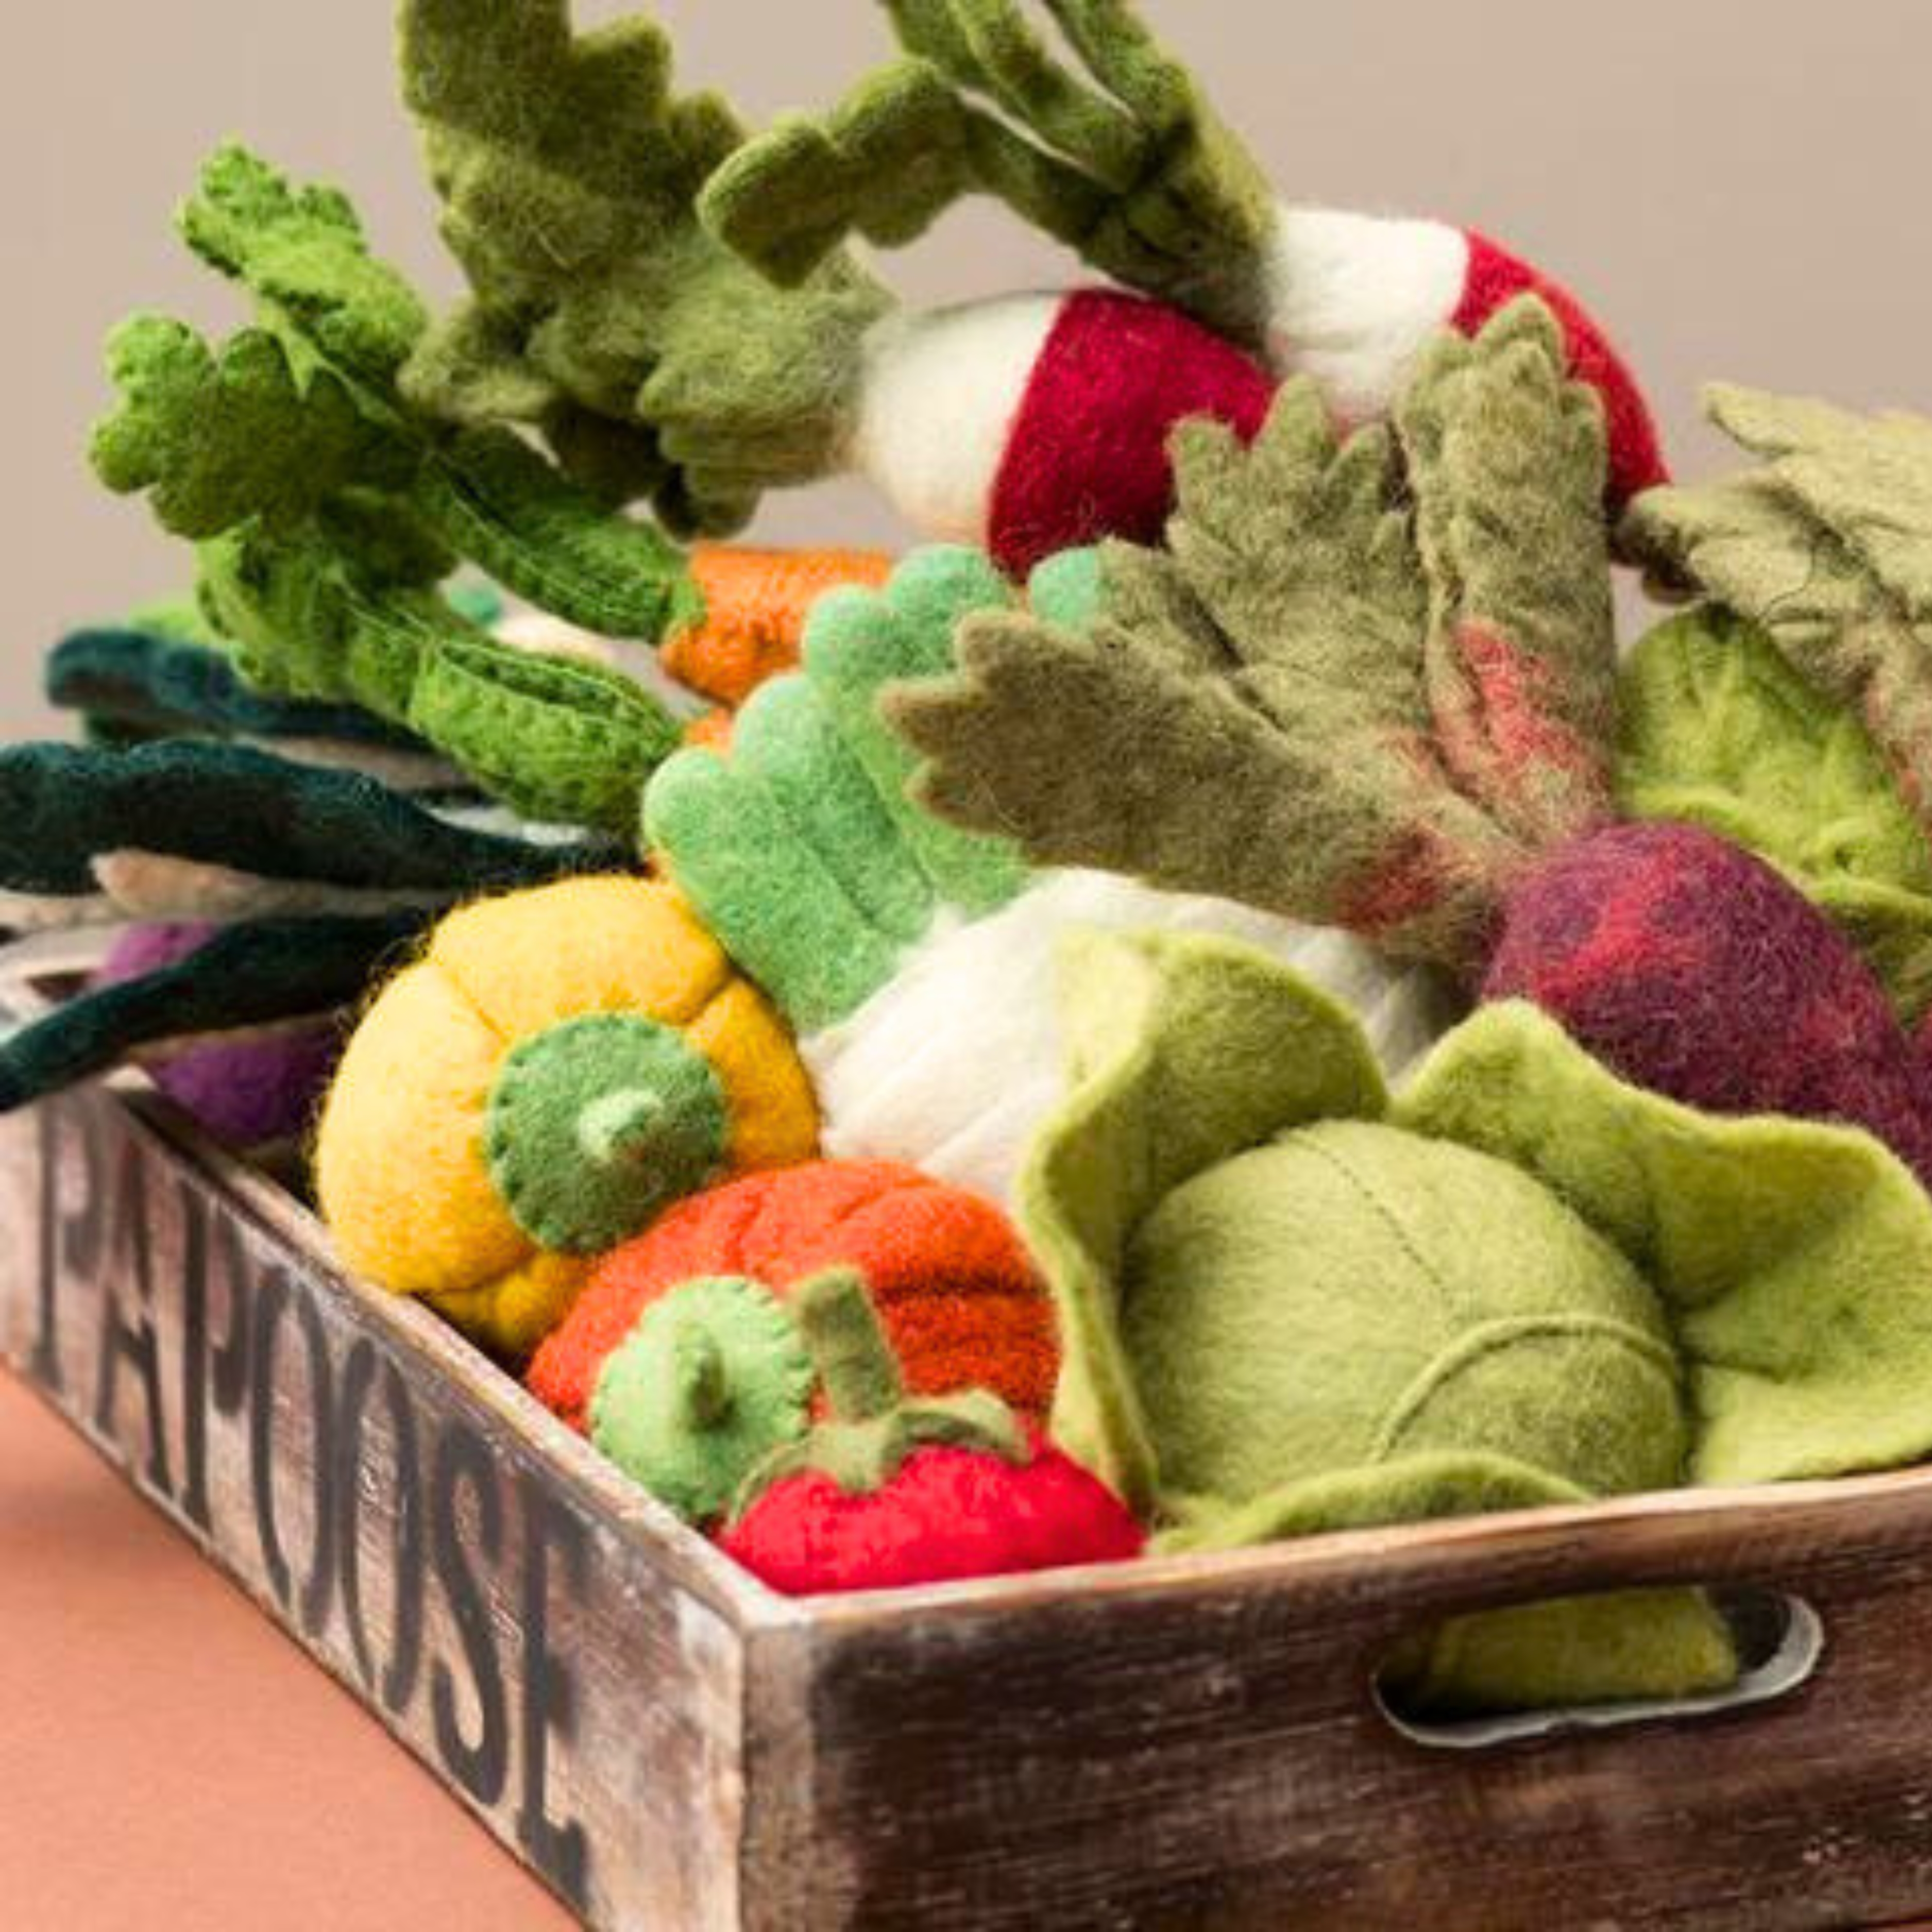 Food - Crate with Vegetables  